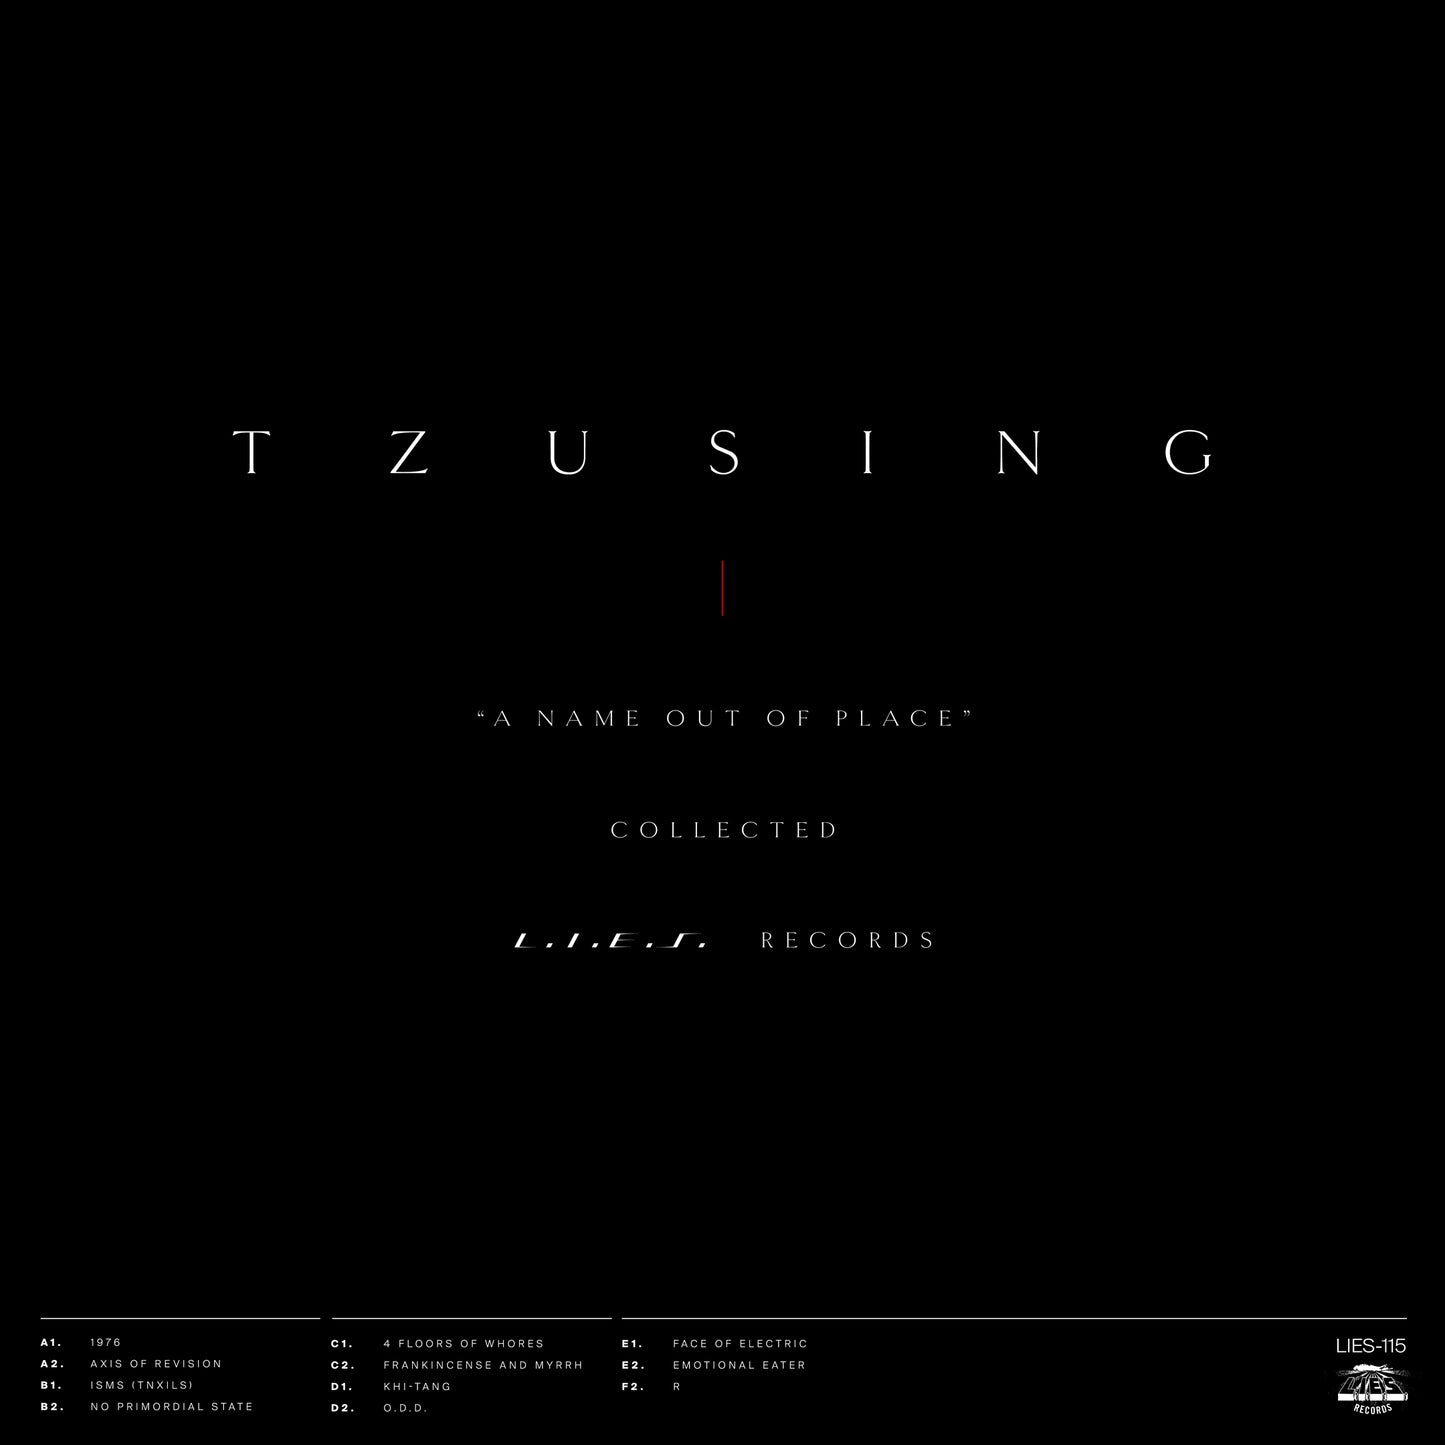 Tzusing - A Name Out of Place Collected 3xLP - LIES-115